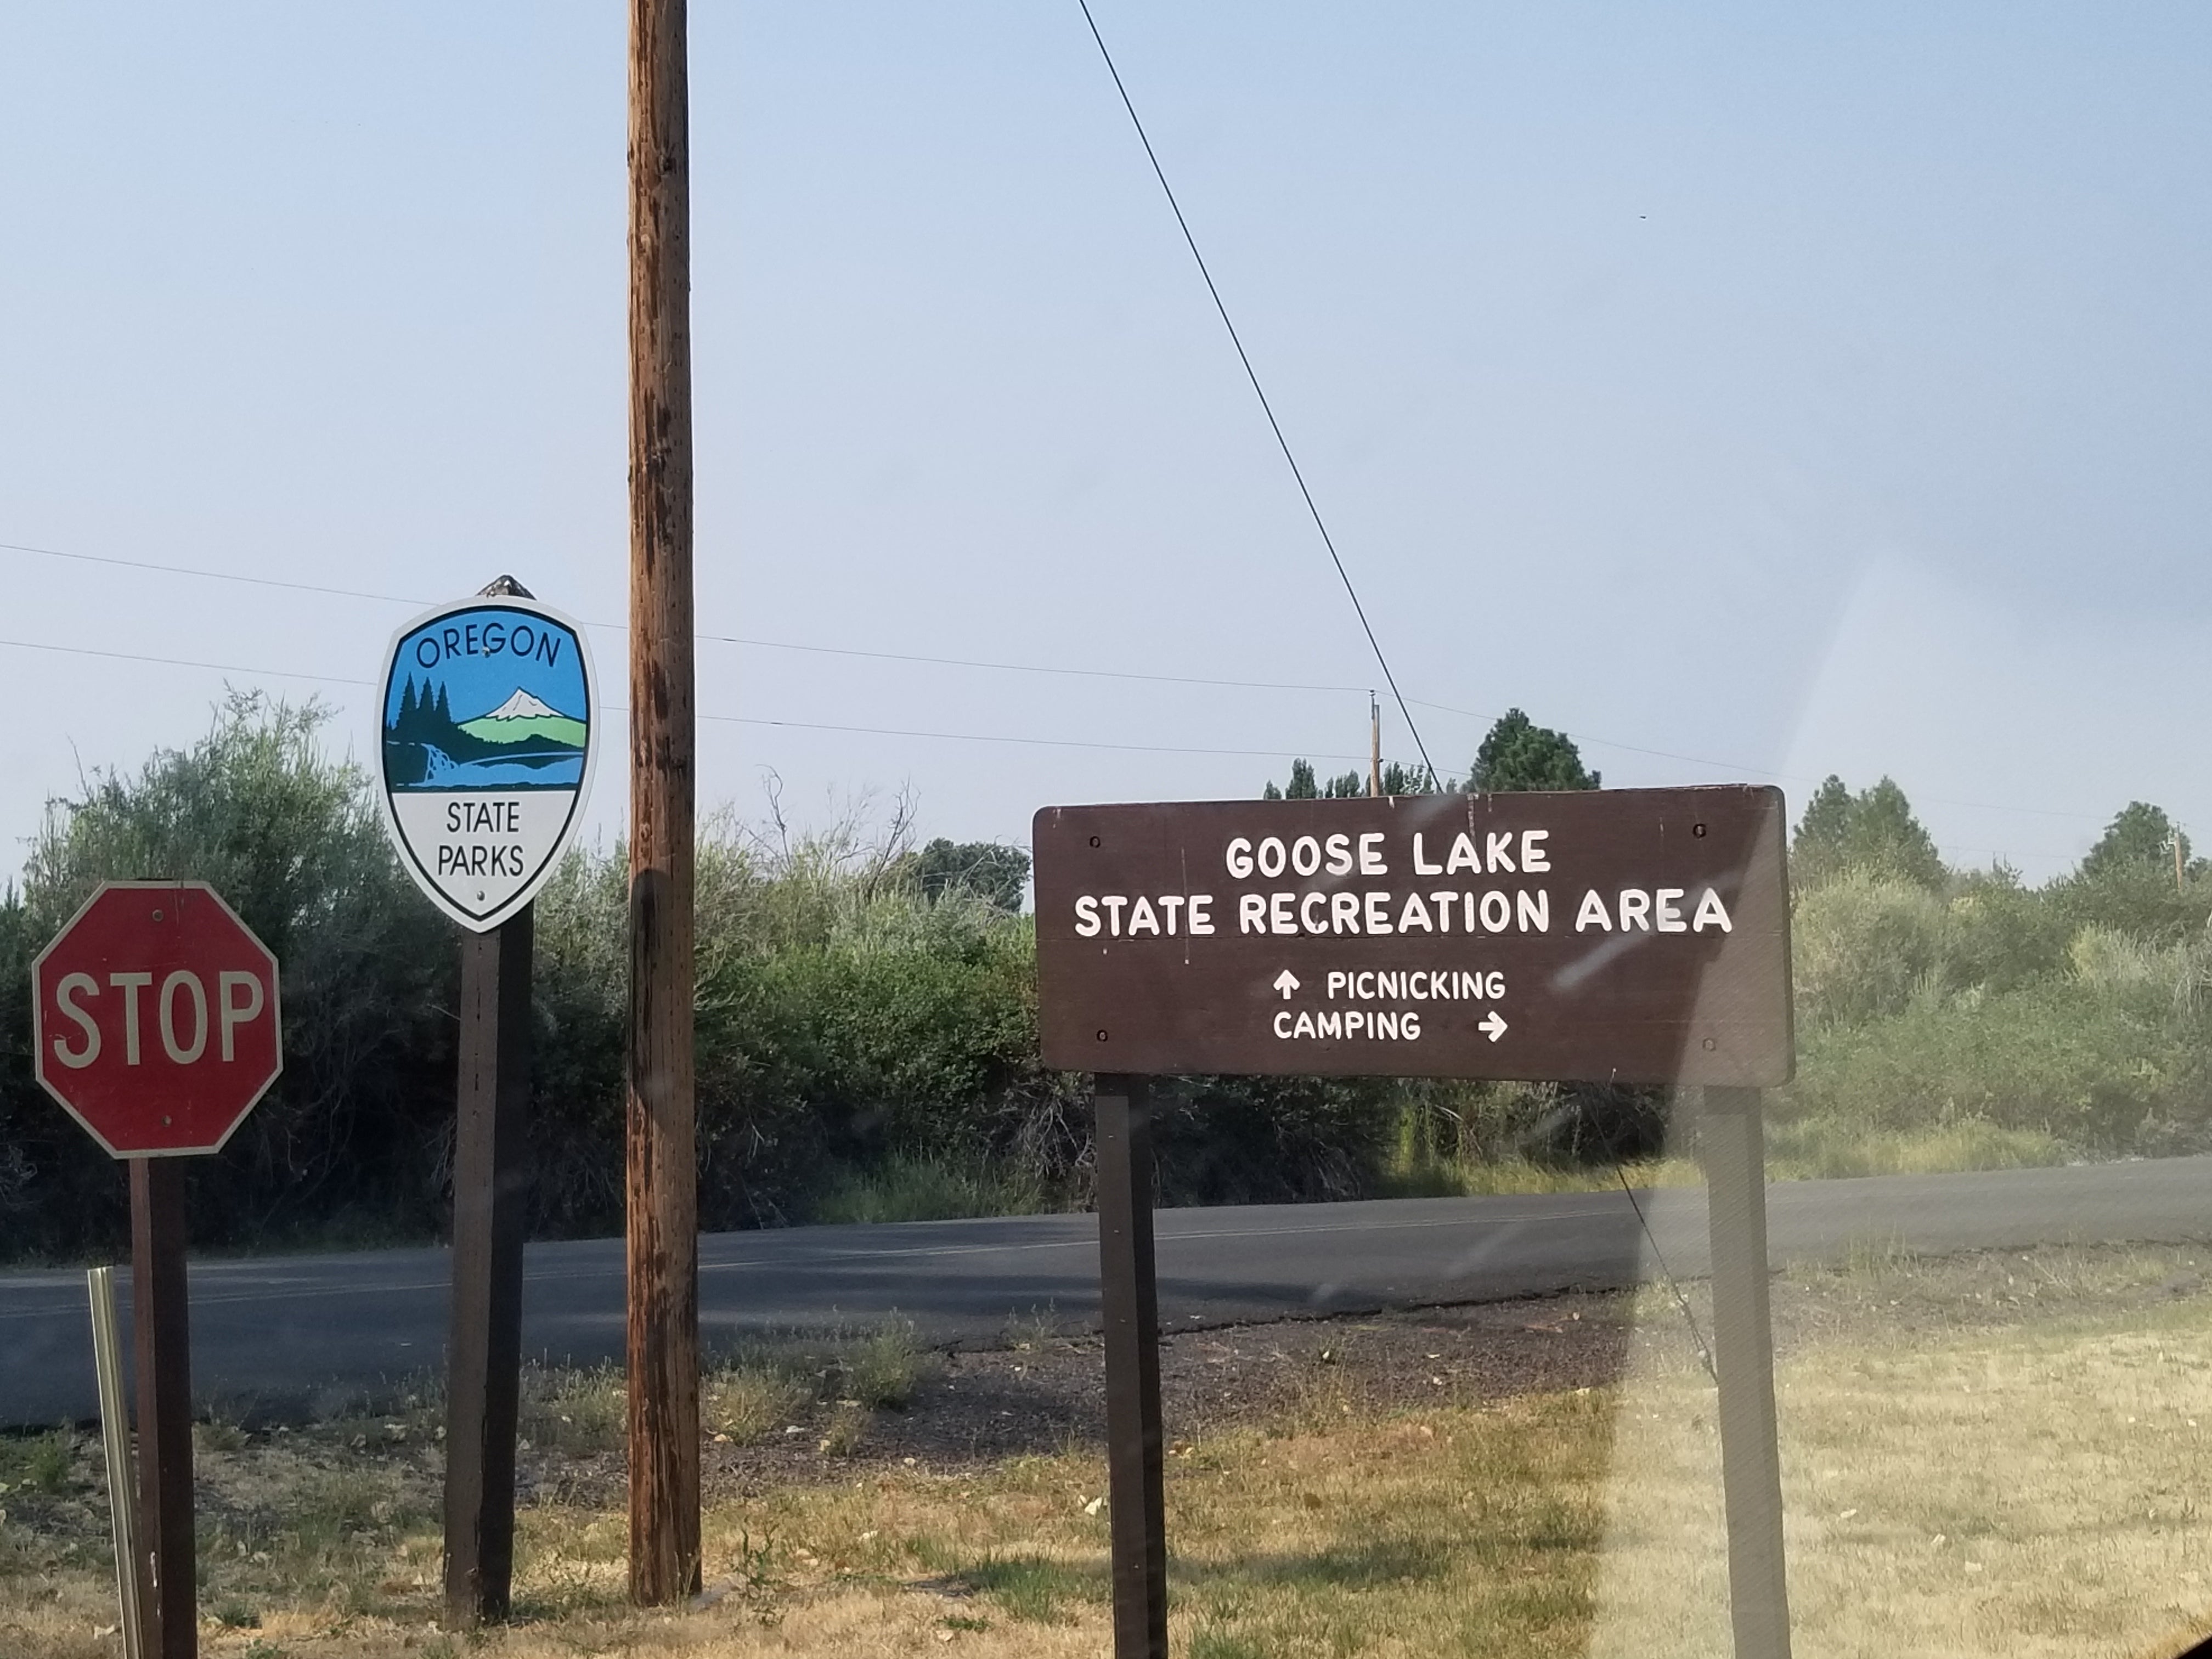 Camper submitted image from Goose Lake State Recreation Area - 2